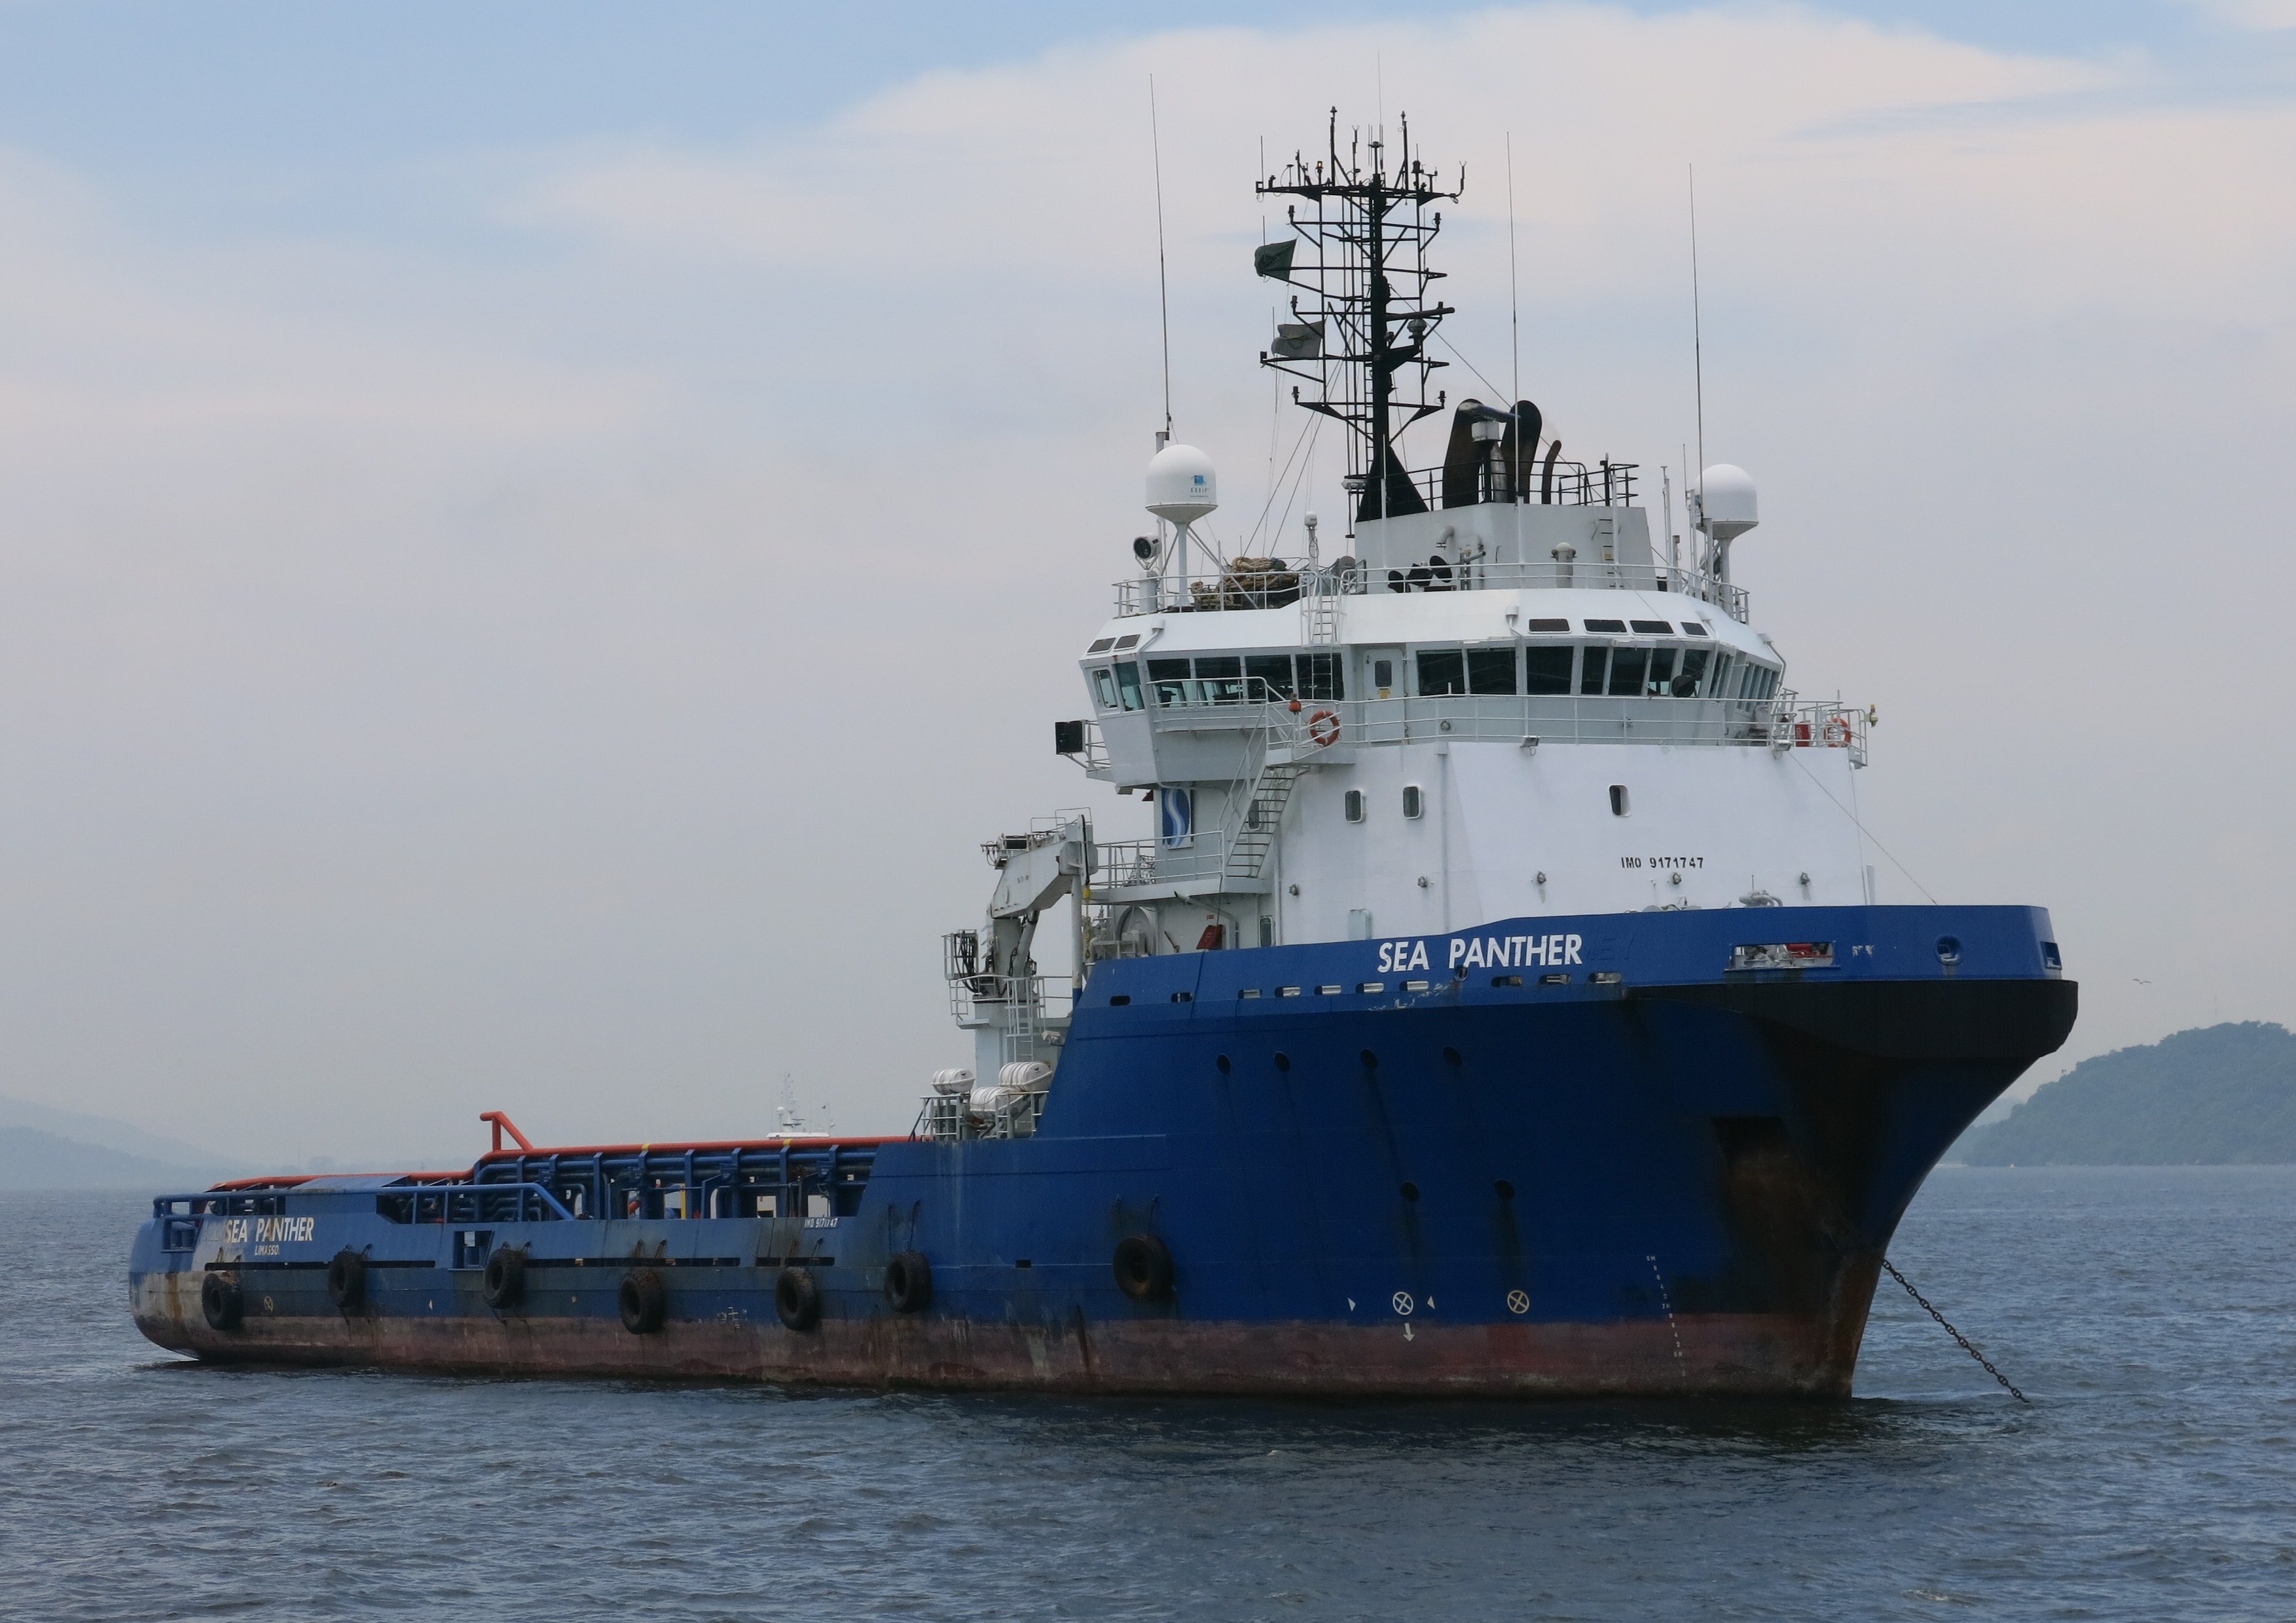 SEA PANTHER - 9171747 - ANCHOR HANDLING VESSEL | Maritime-Connector.com